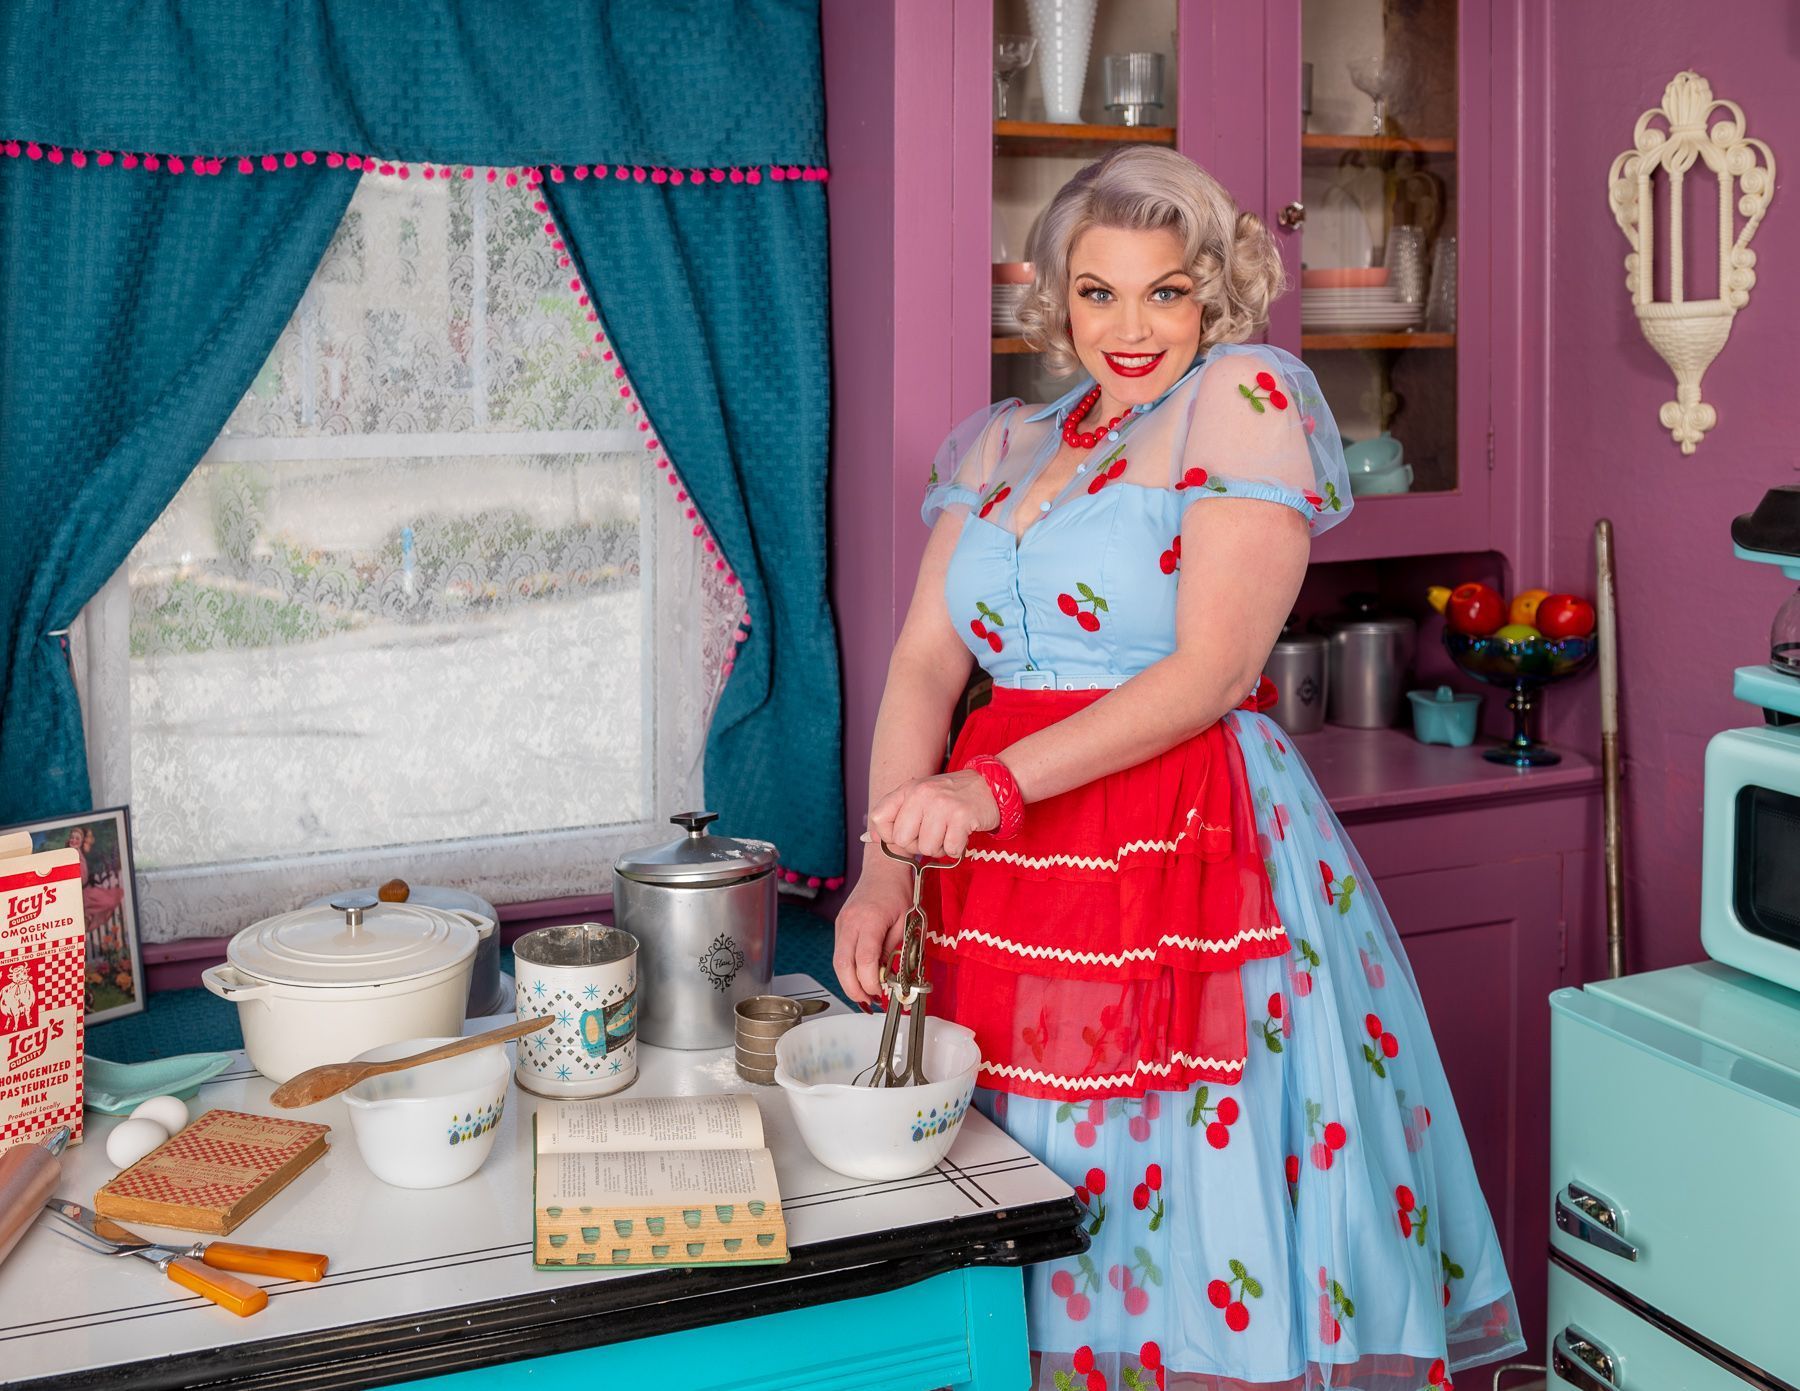 Pin up girl, 1950's inspired, baking/cooking  in vintage studio kitchen